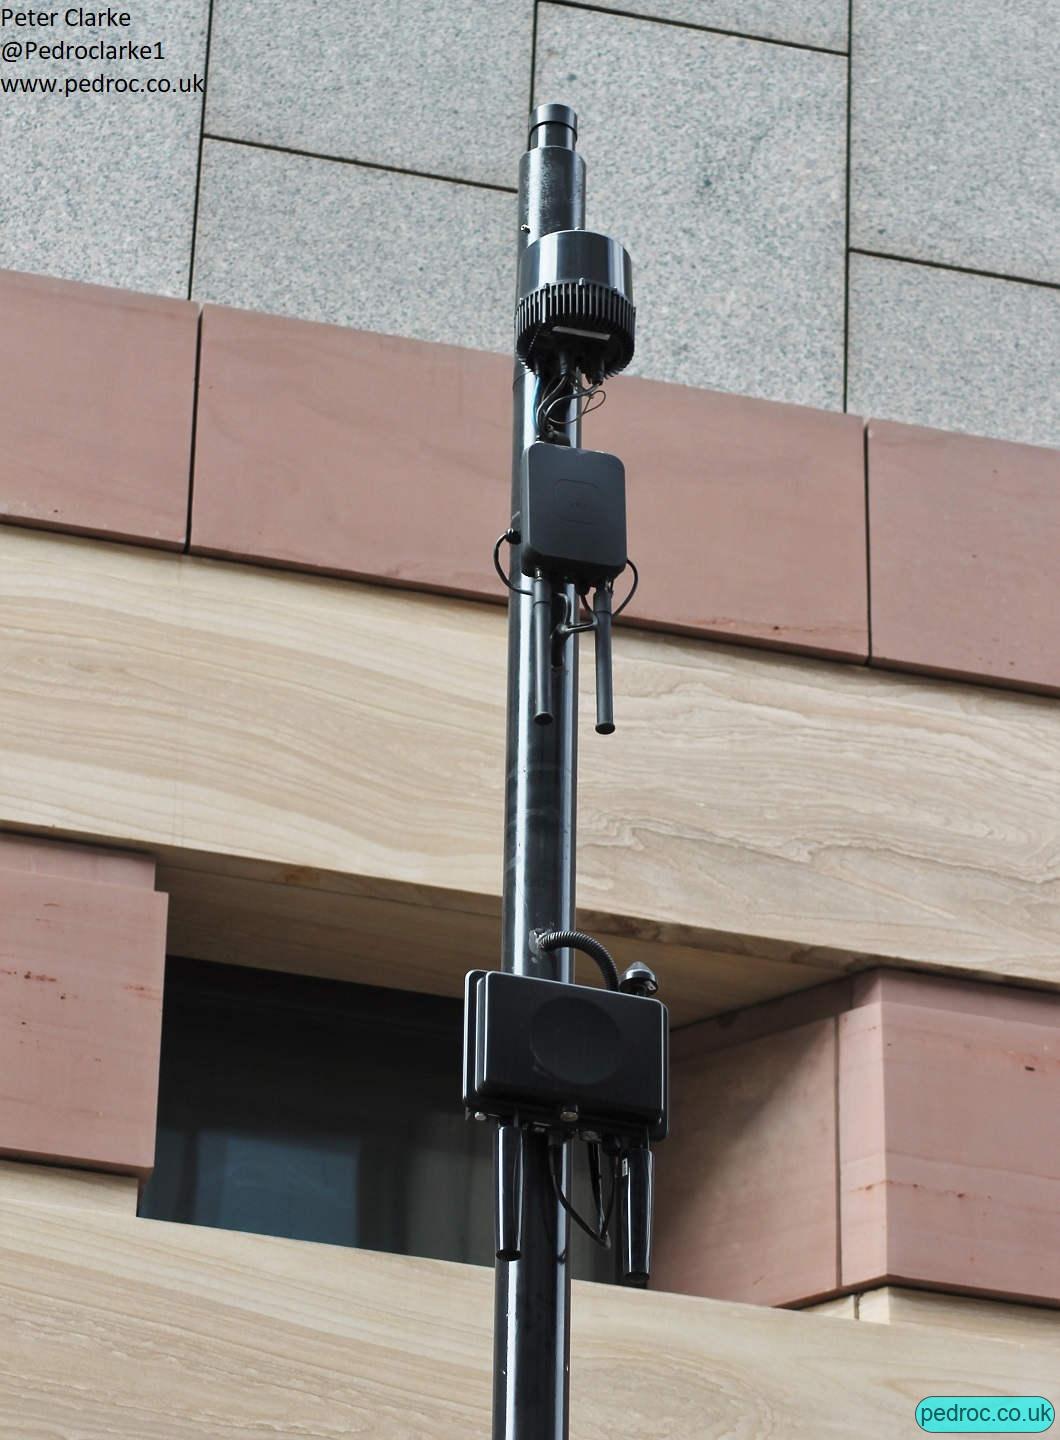 Nokia Flexi Zone Small Cell poles in the city of London for O2 UK. 